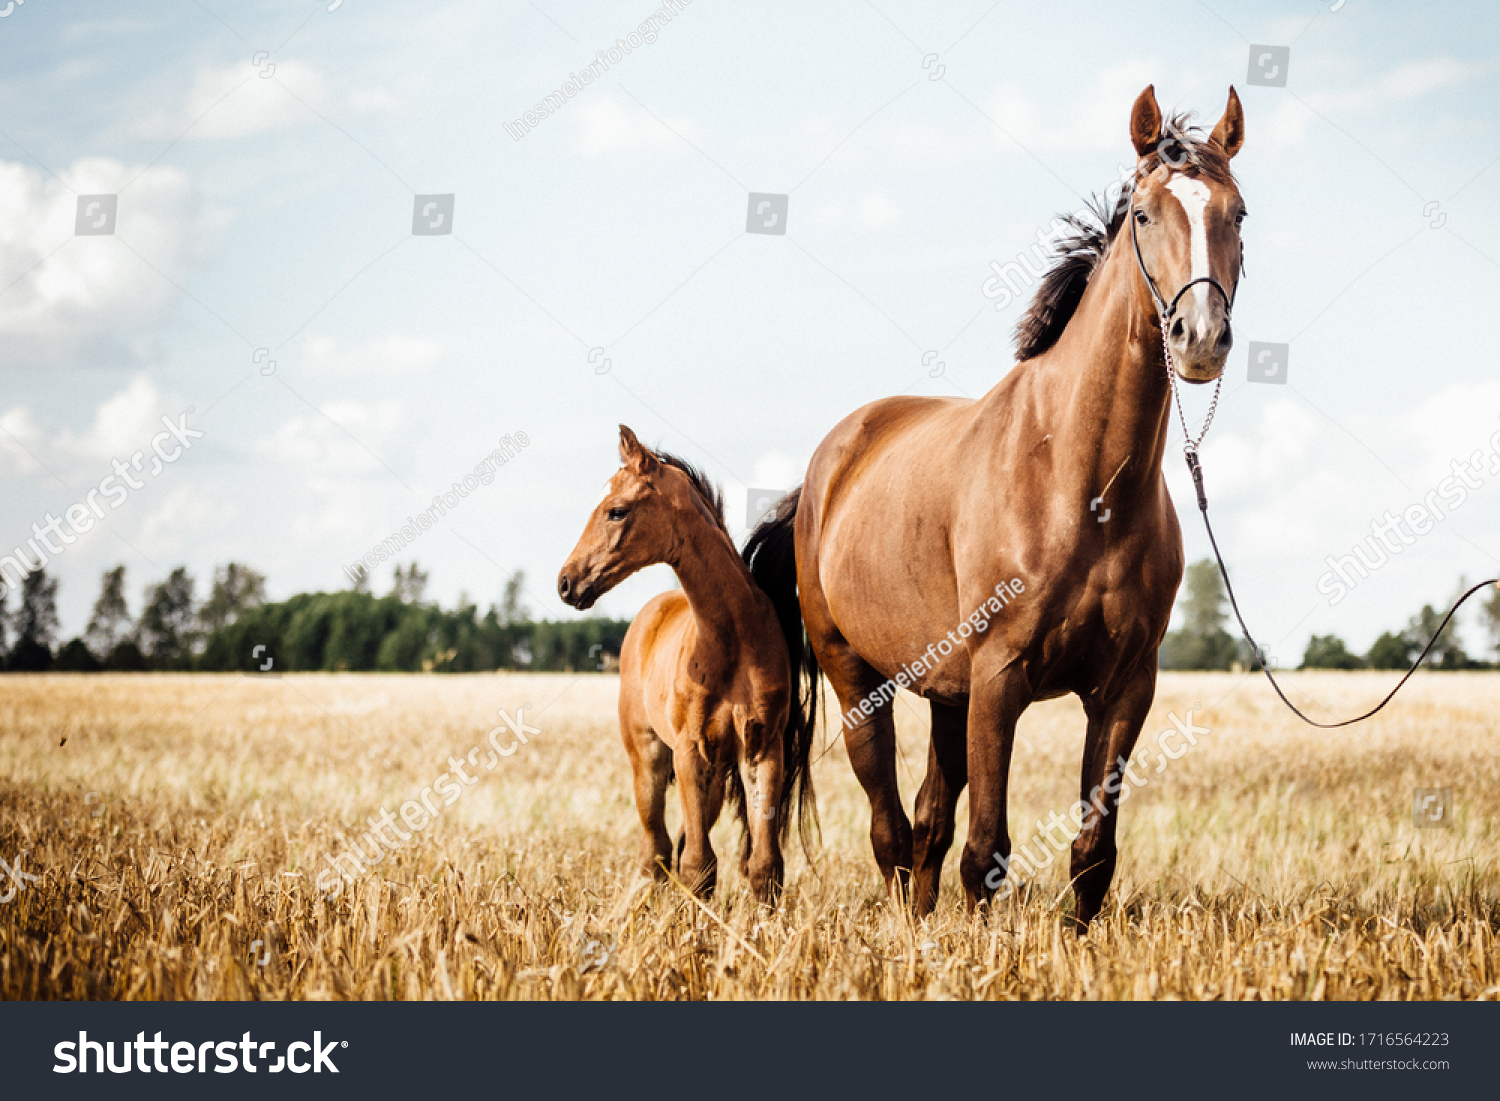 Horse Stud and her beautiful foal on a field #1716564223